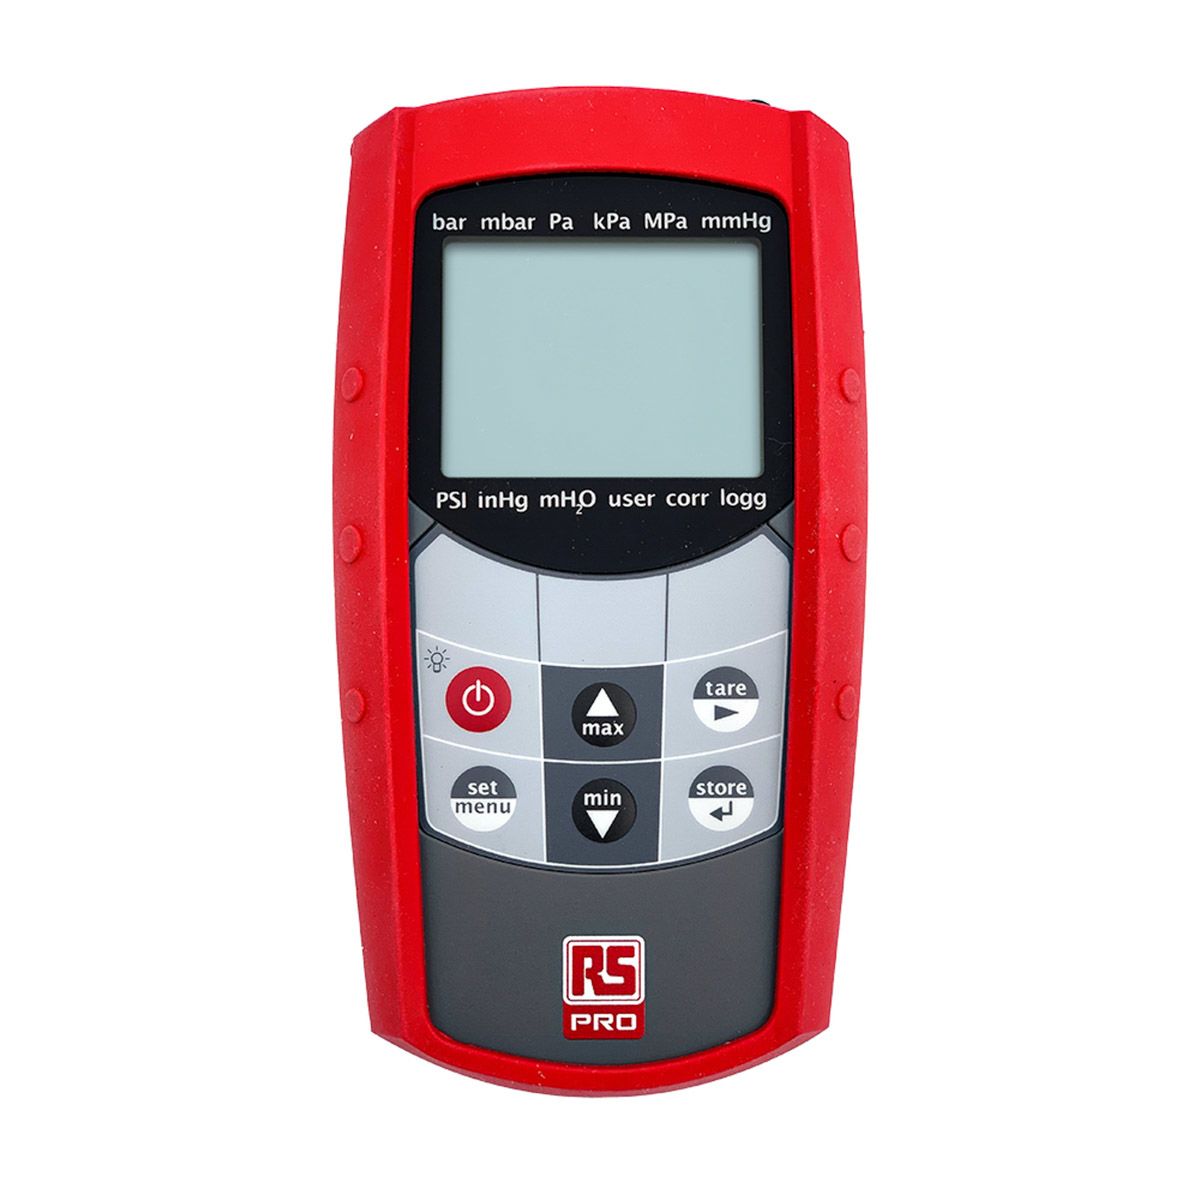 RS PRO RS MH 5130 + RS GMSD 350 MR Differential Manometer With 1 Pressure Port/s, Max Pressure Measurement 0.35bar UKAS